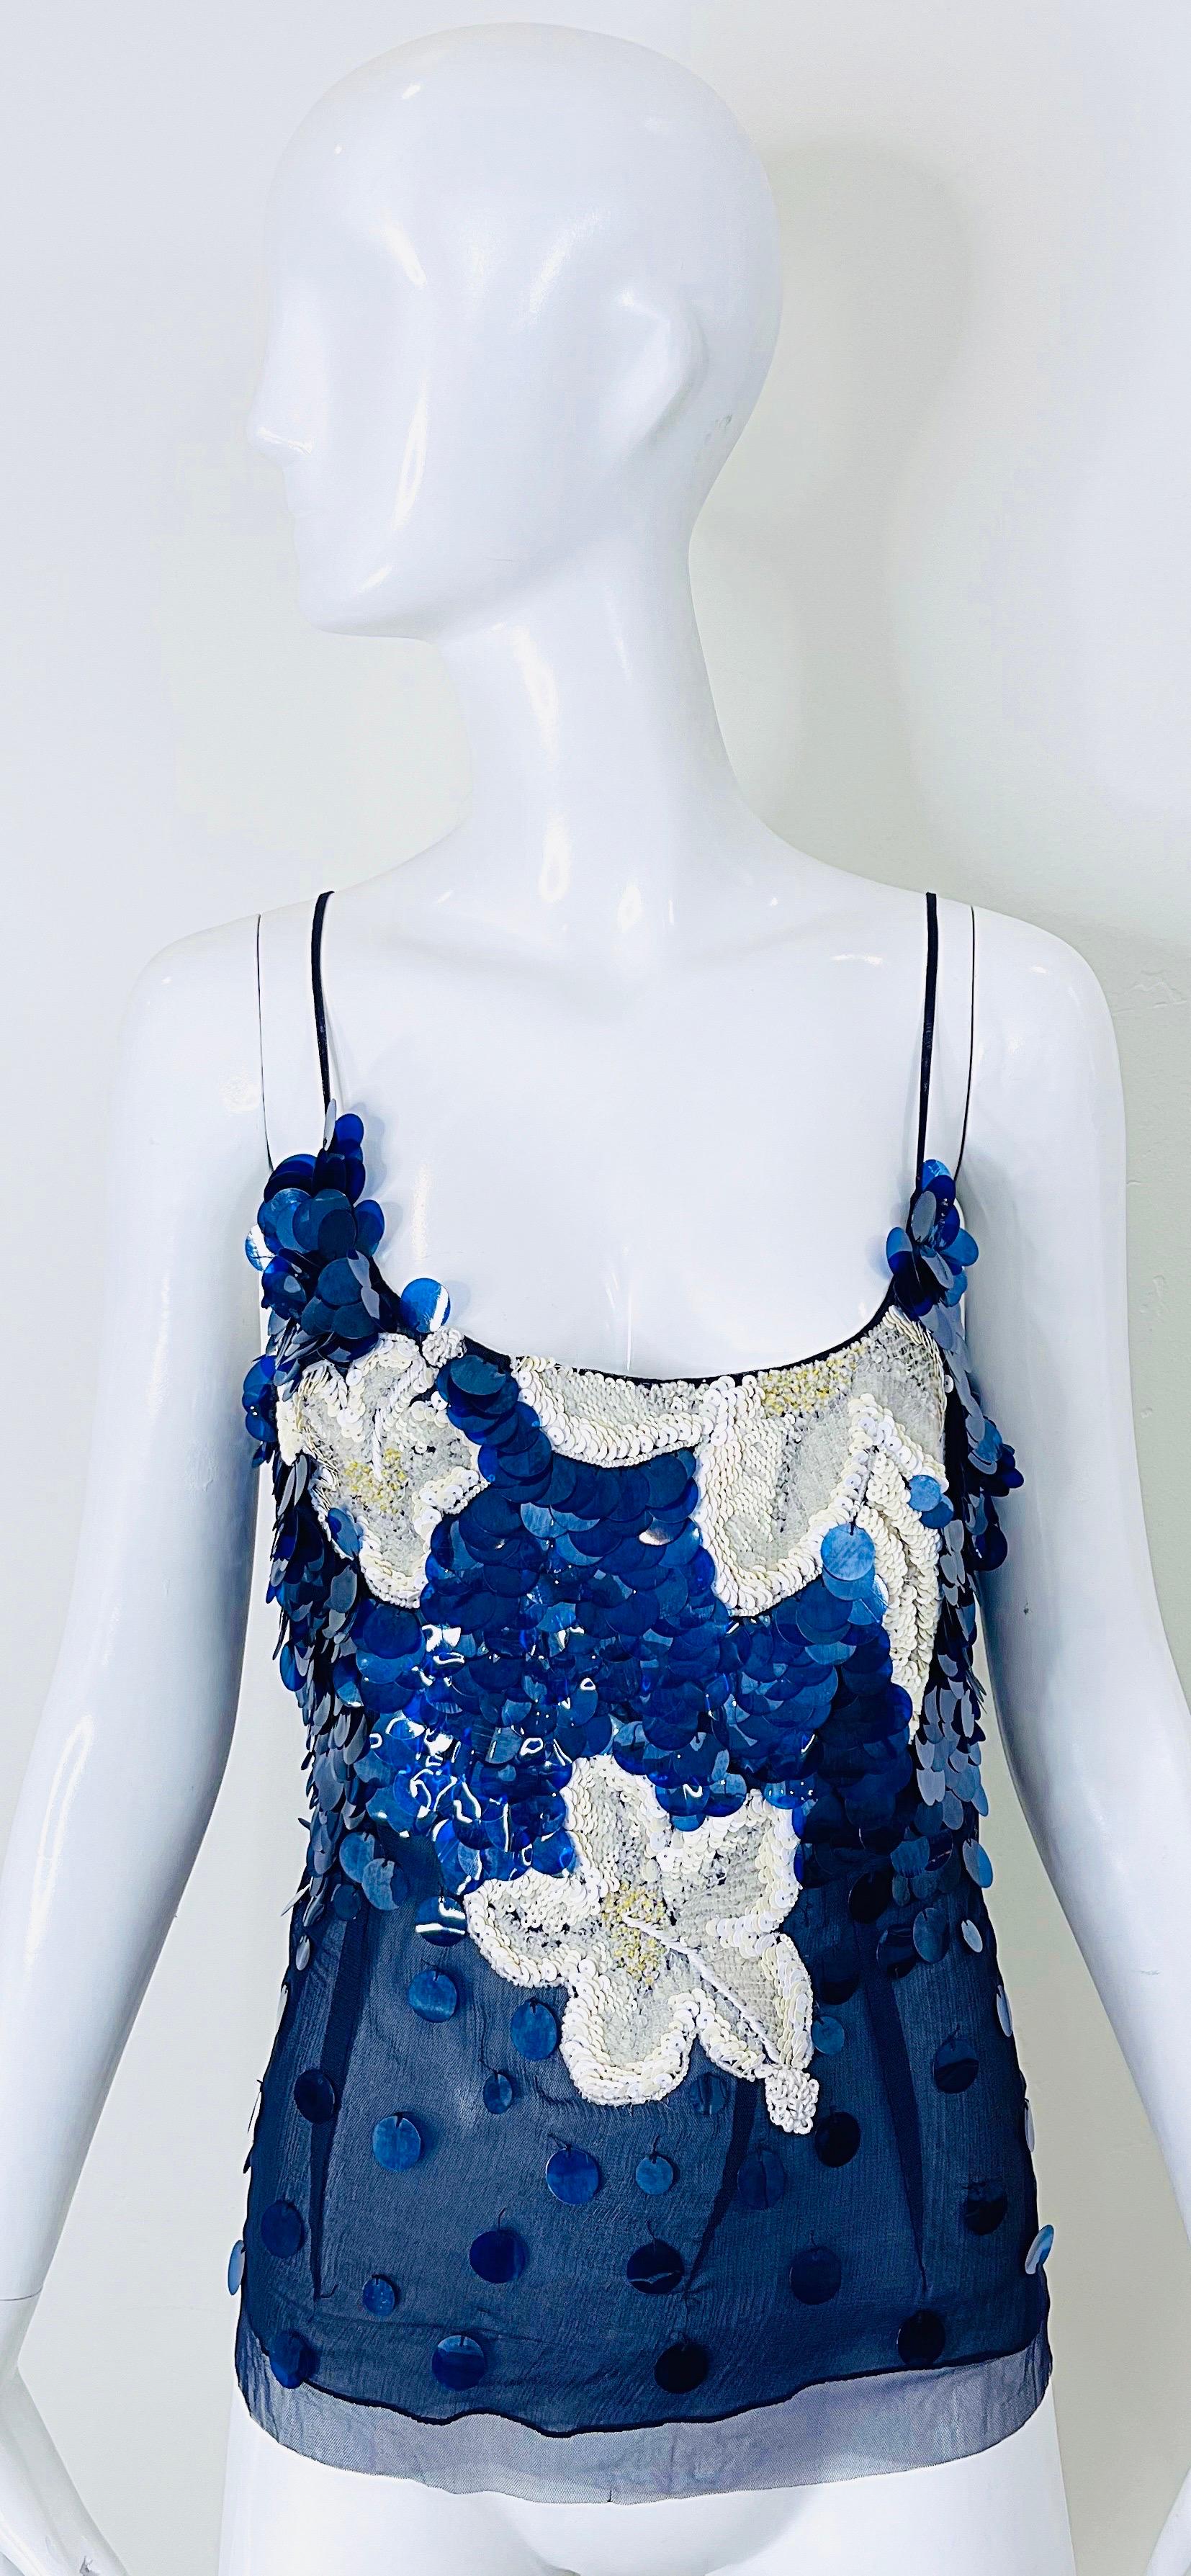 Brand new with tags beautiful early 2000s GIANFRANCO FERRE navy blue and white sequin and paillette encrusted silk chiffon blouse ! Features thousands of hand-sewn sequins and beads throughout. hidden zipper up the side.
Pair with white trousers, a